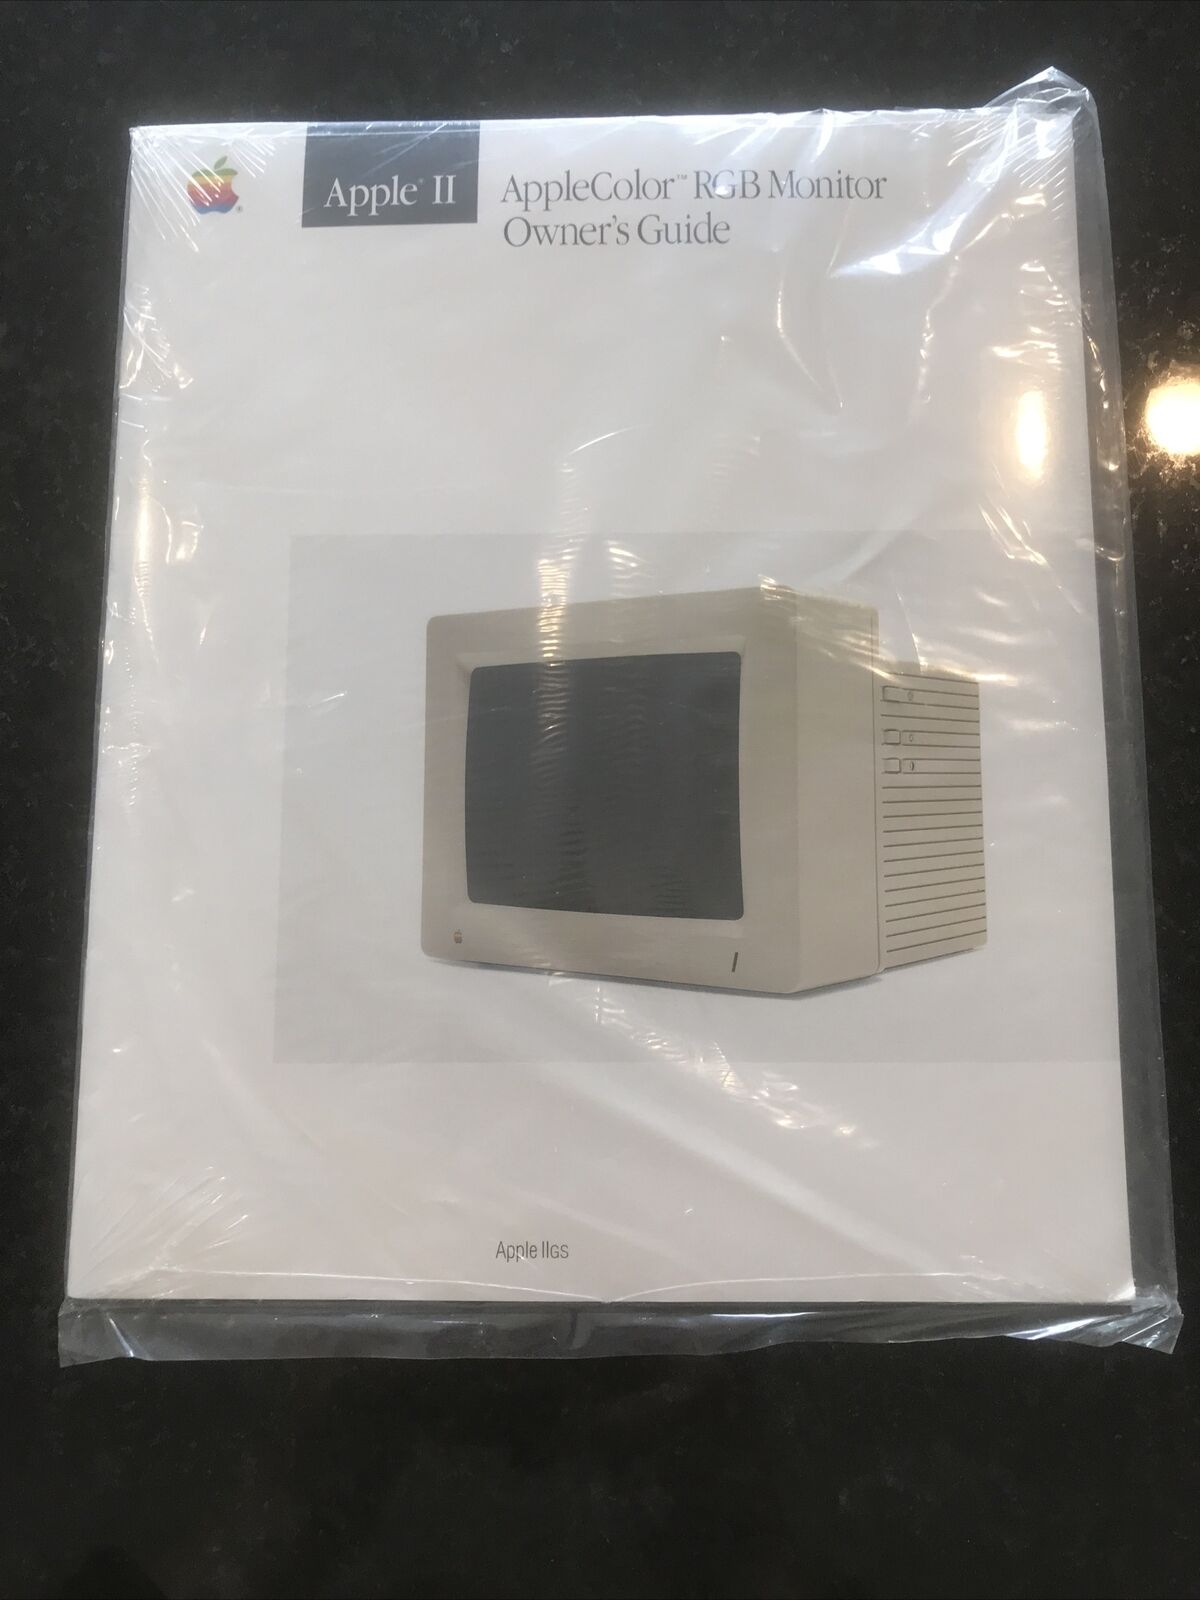 Sealed VINTAGE Apple II AppleColor RGB Monitors Own Guide, Computer RARE